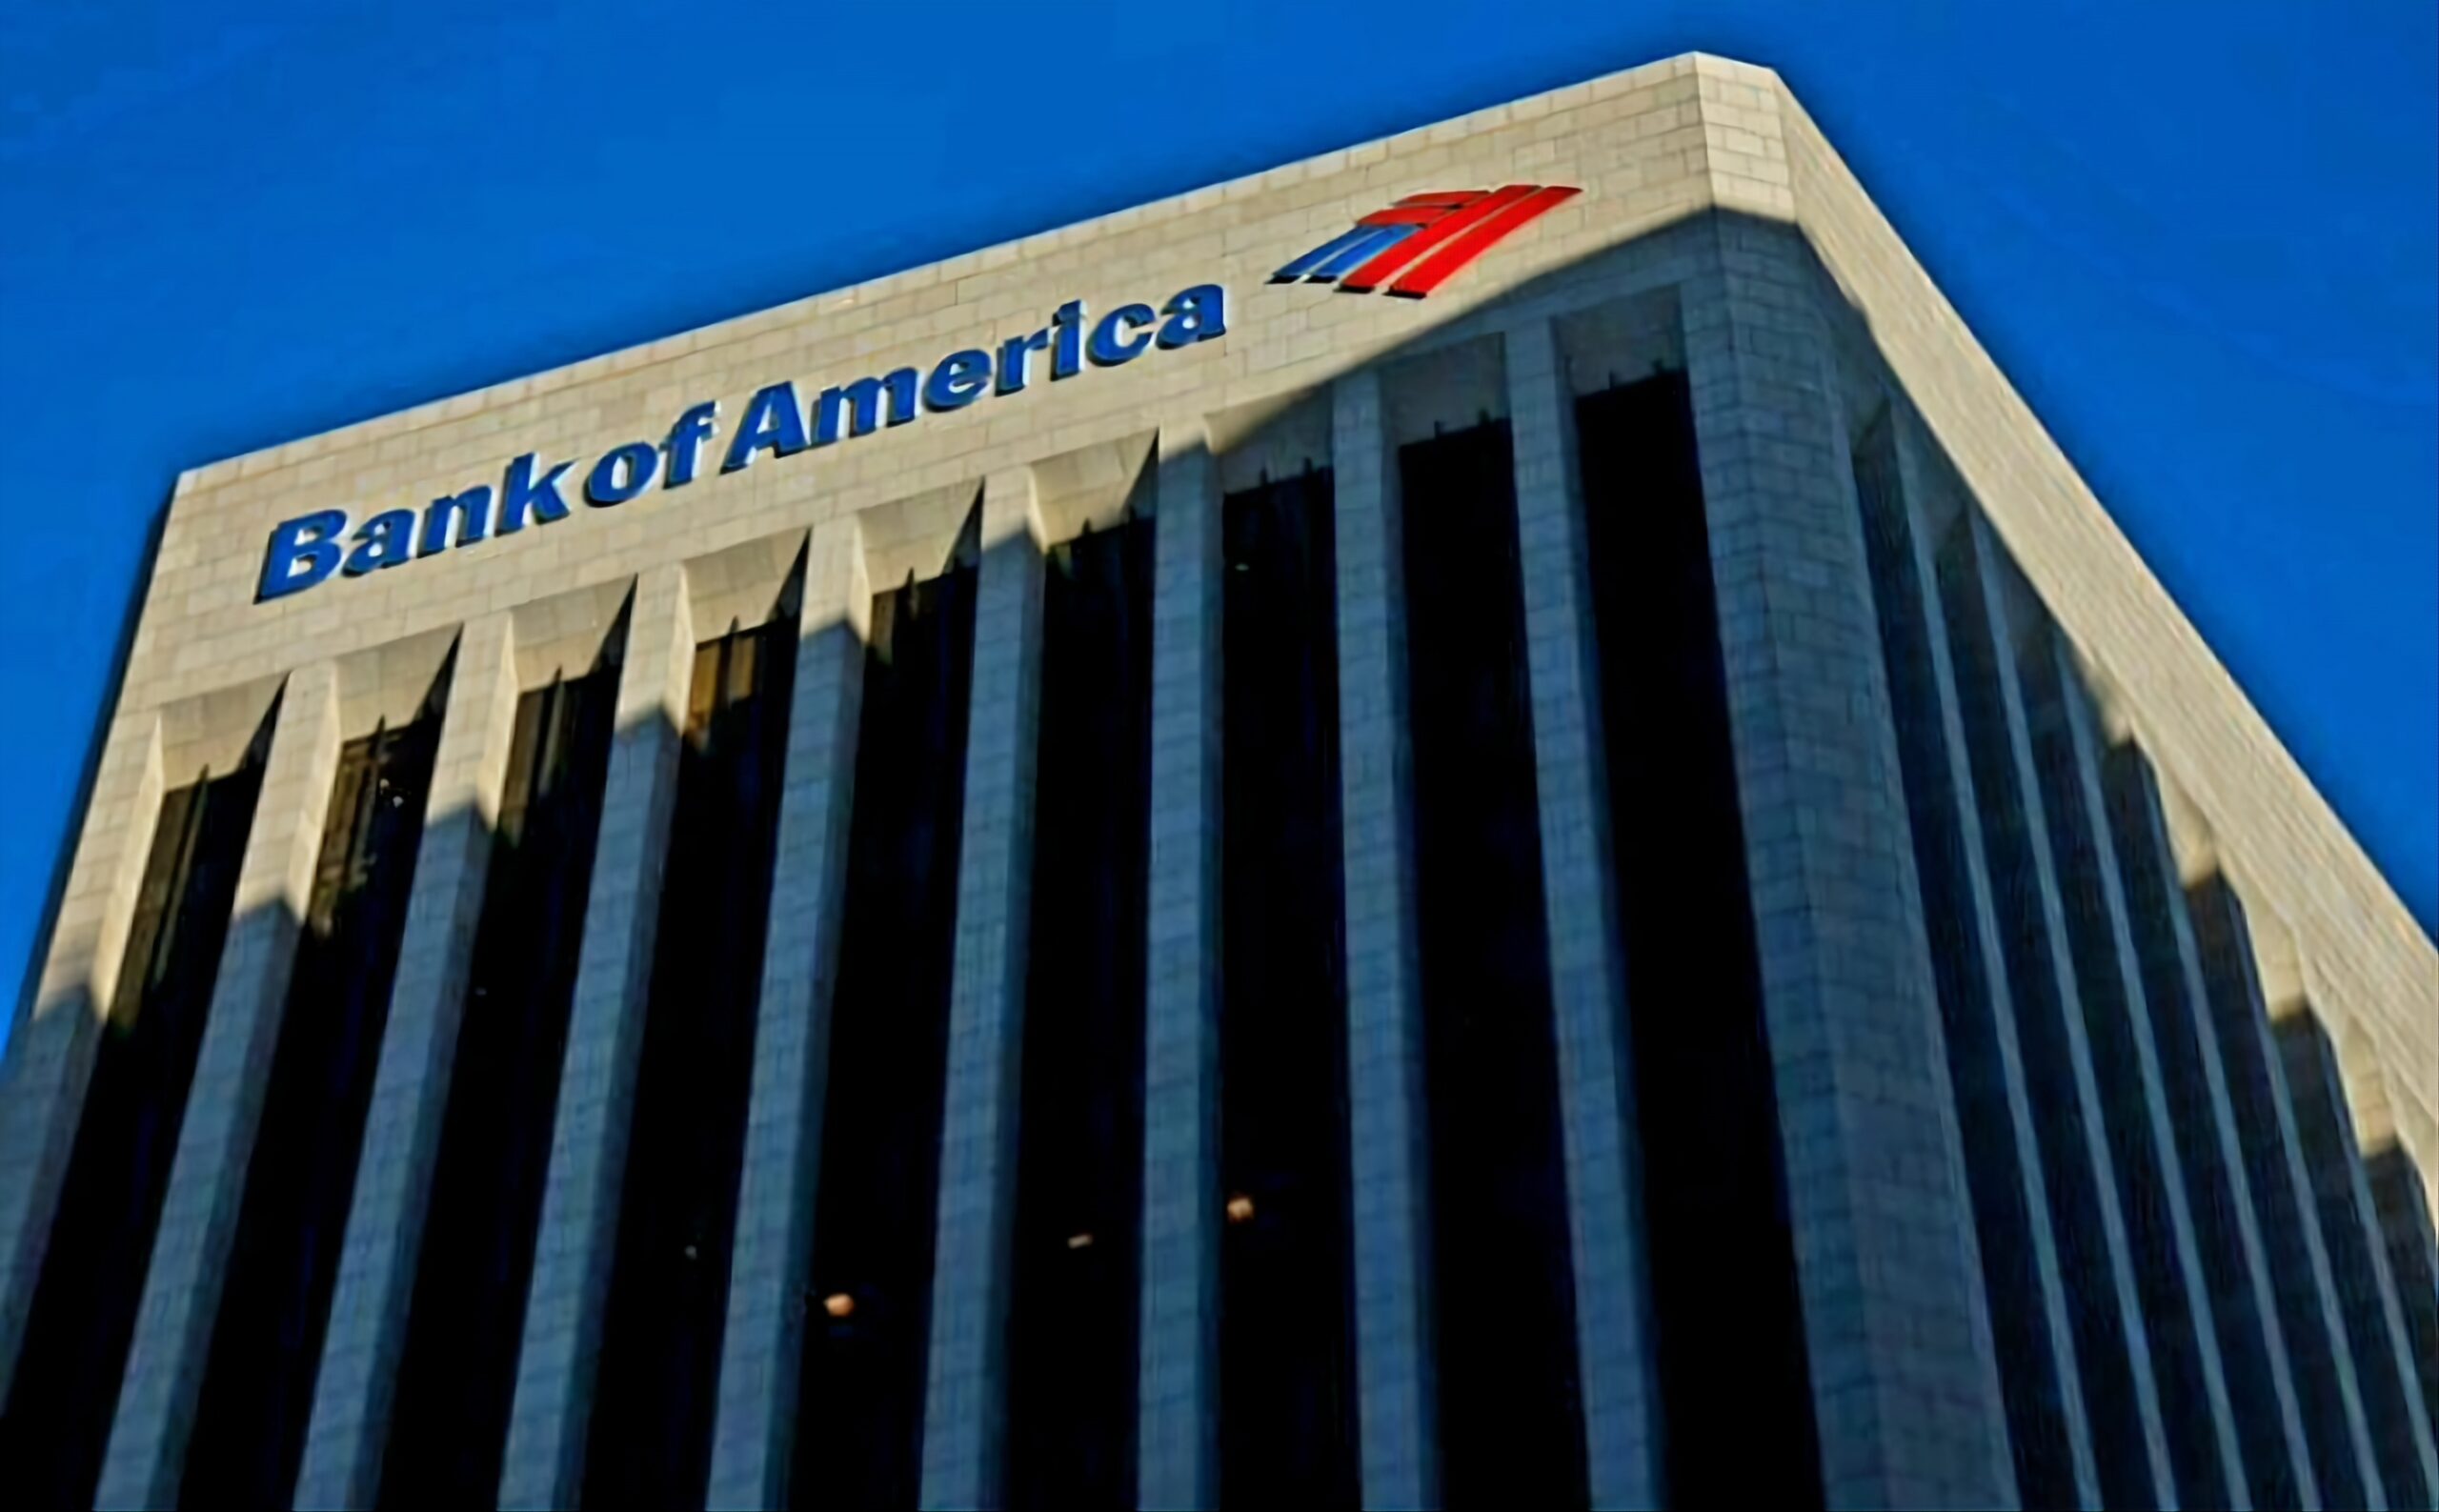 Bank of America is scheduled to close more than 60 branches this year